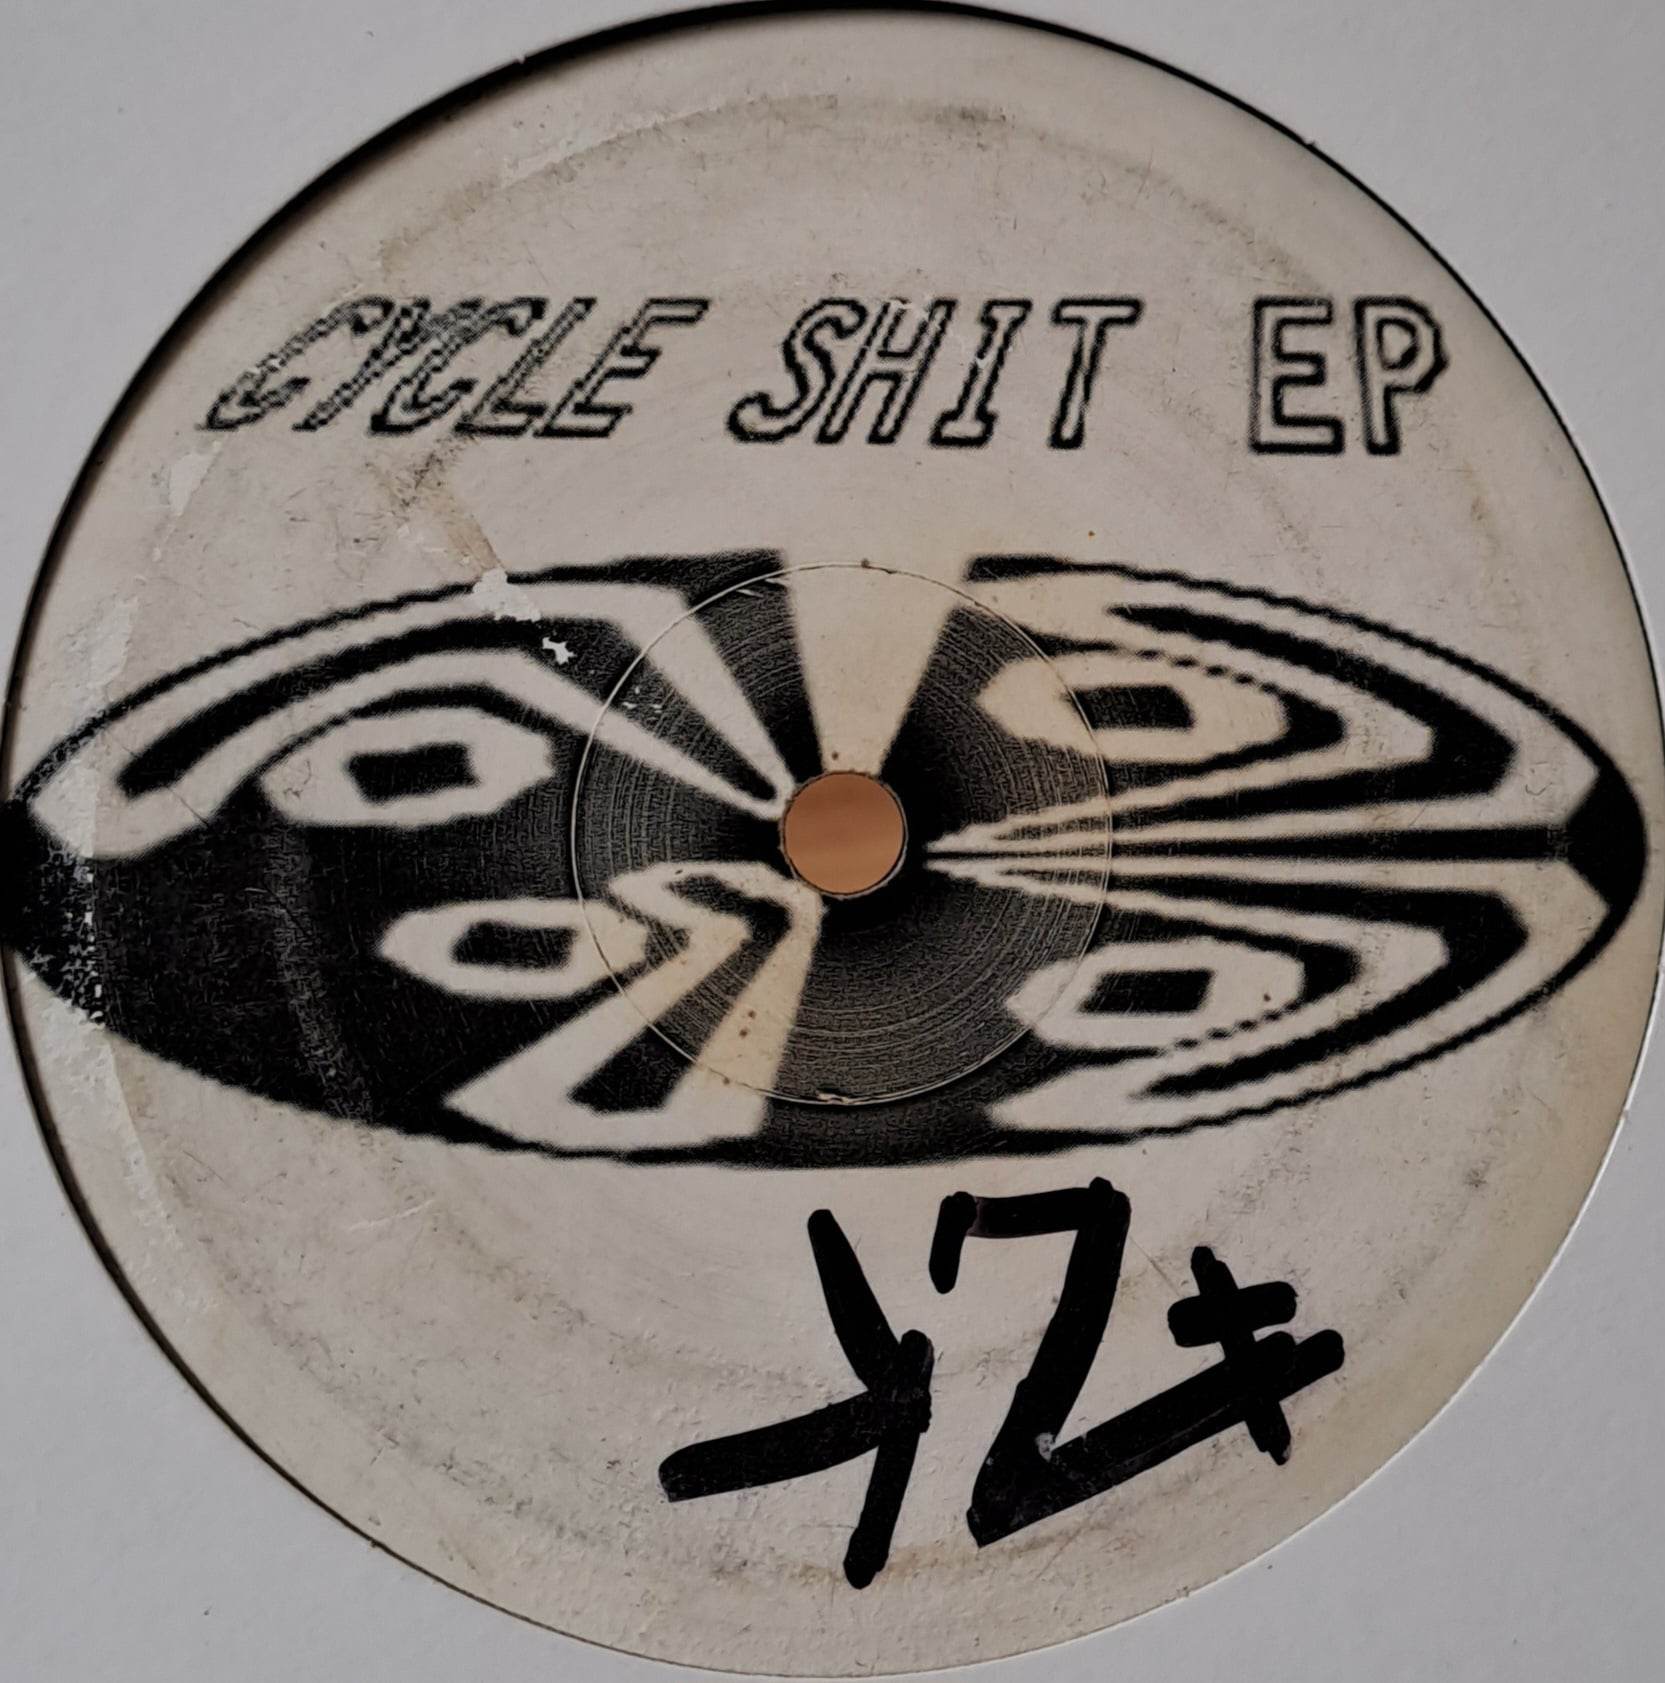 Cycle Shit Ep (69db Self-released) - vinyle freetekno